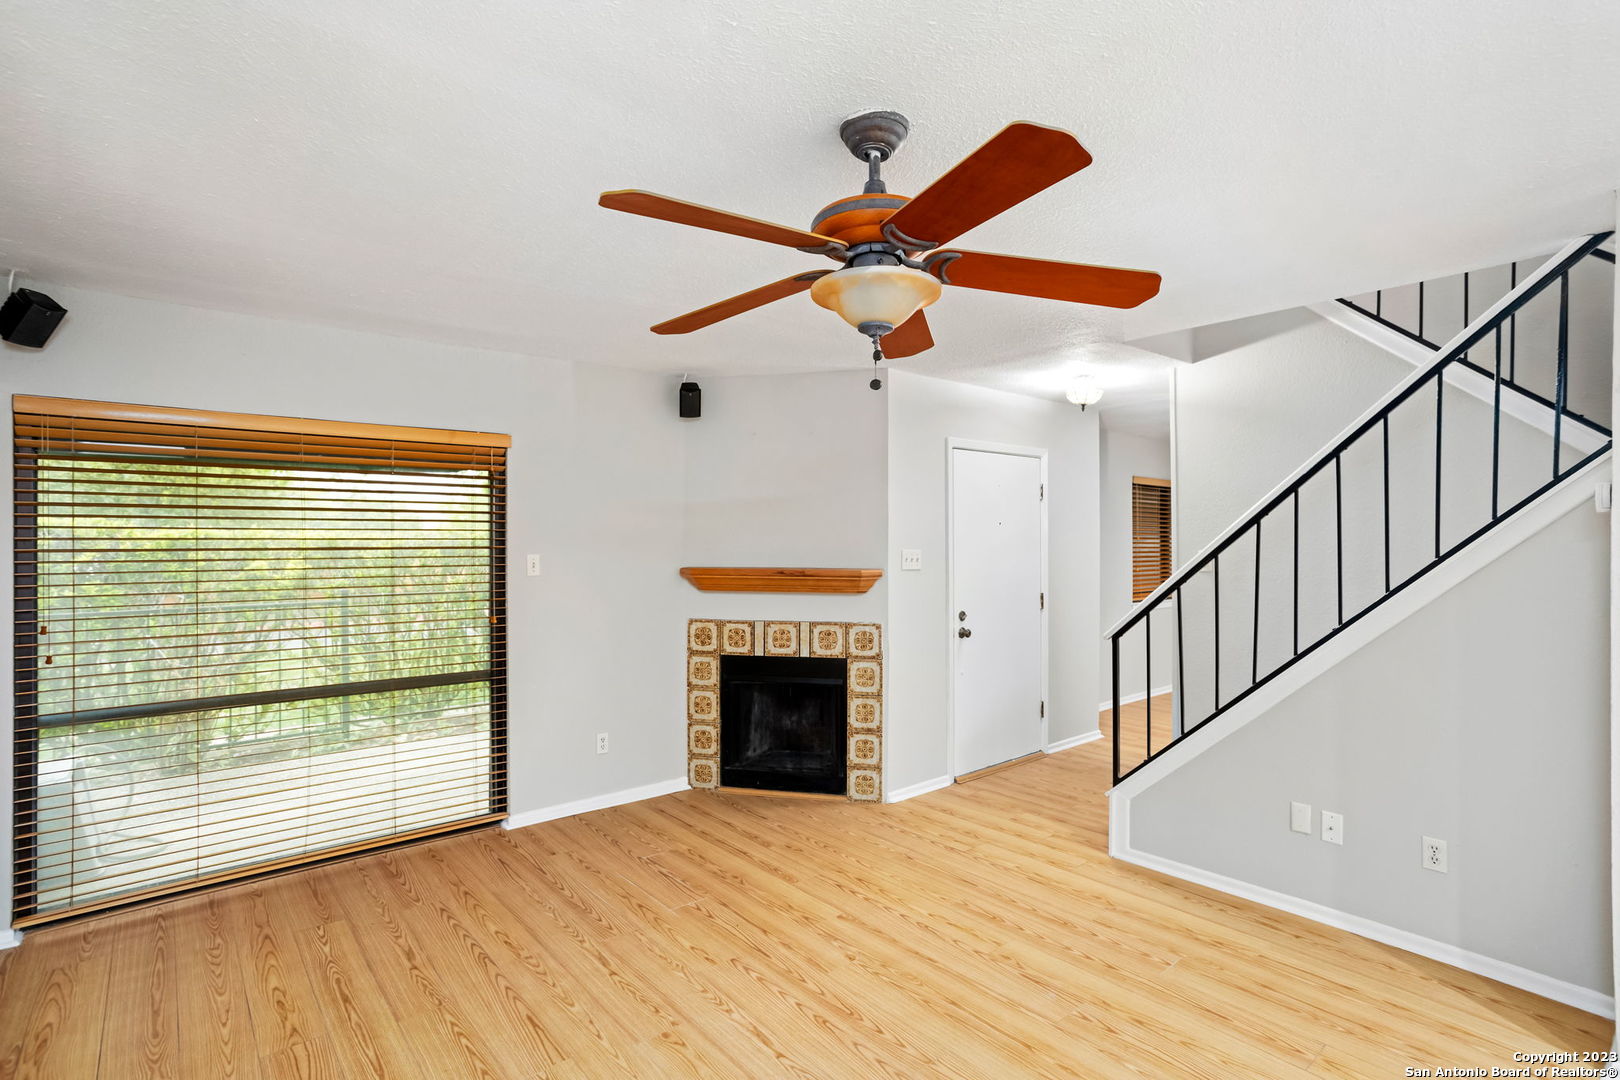 a view of empty room with fireplace and fan